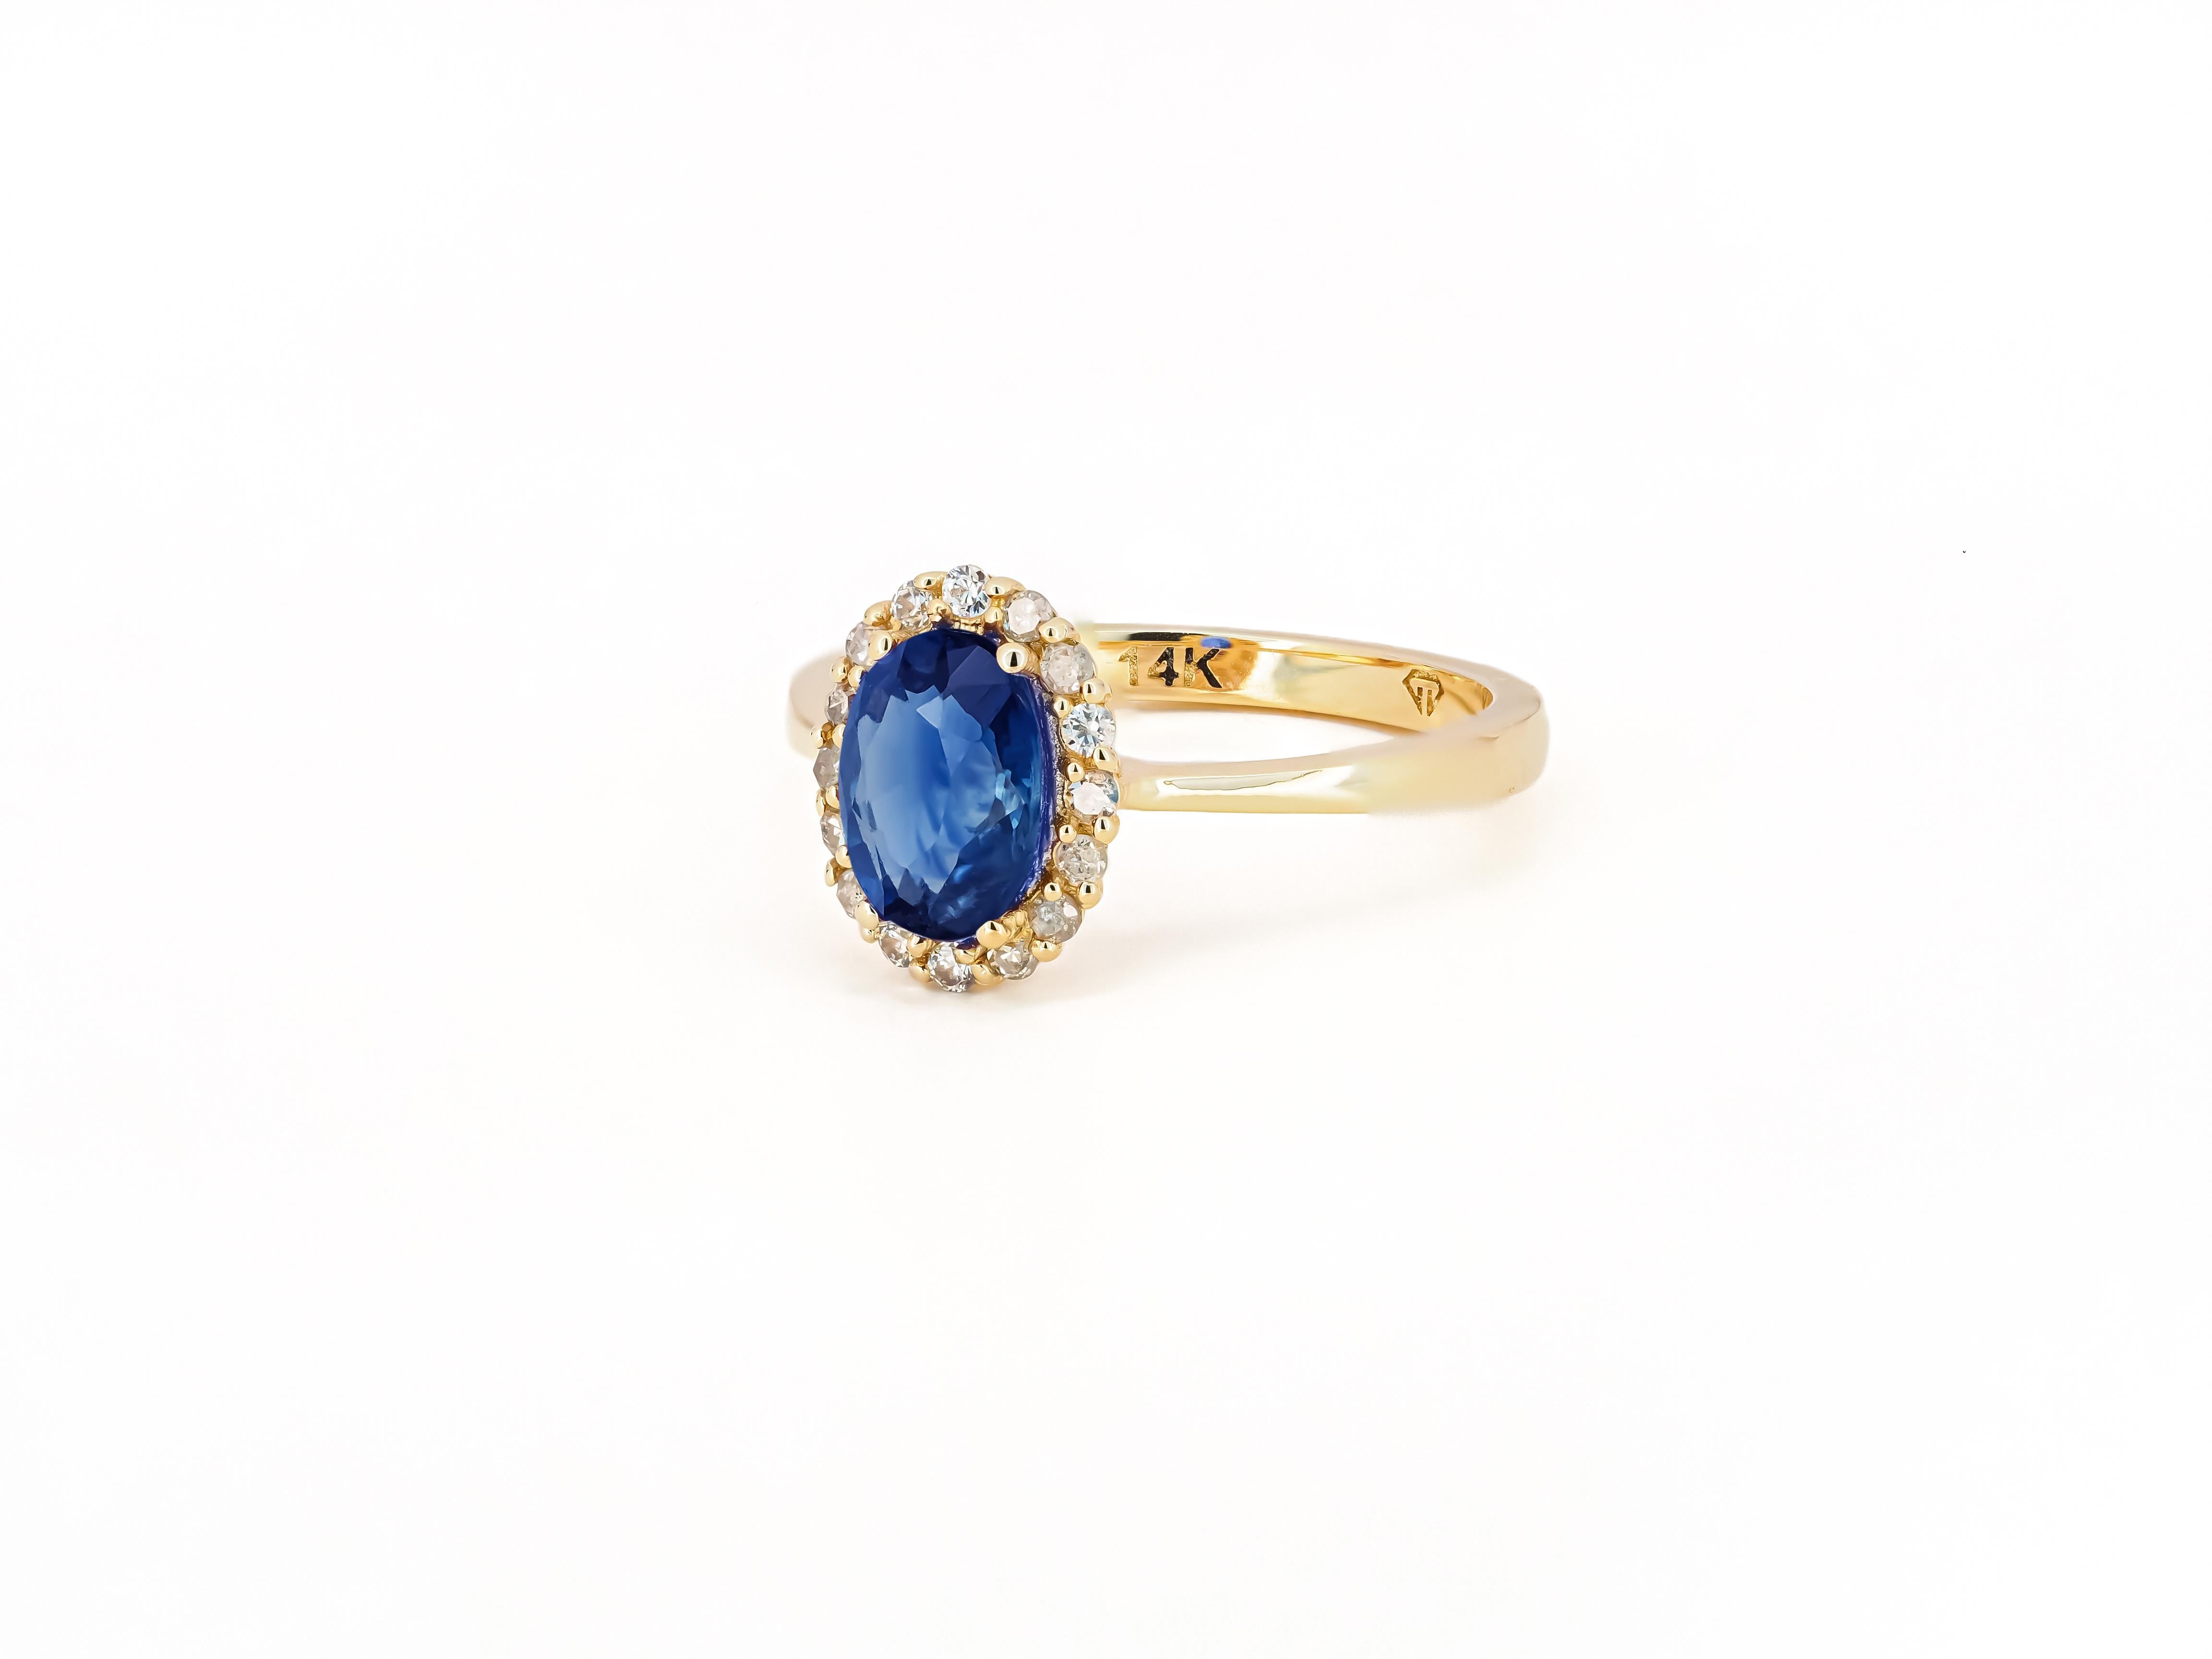 Oval Cut Sapphire ring with diamond halo. For Sale